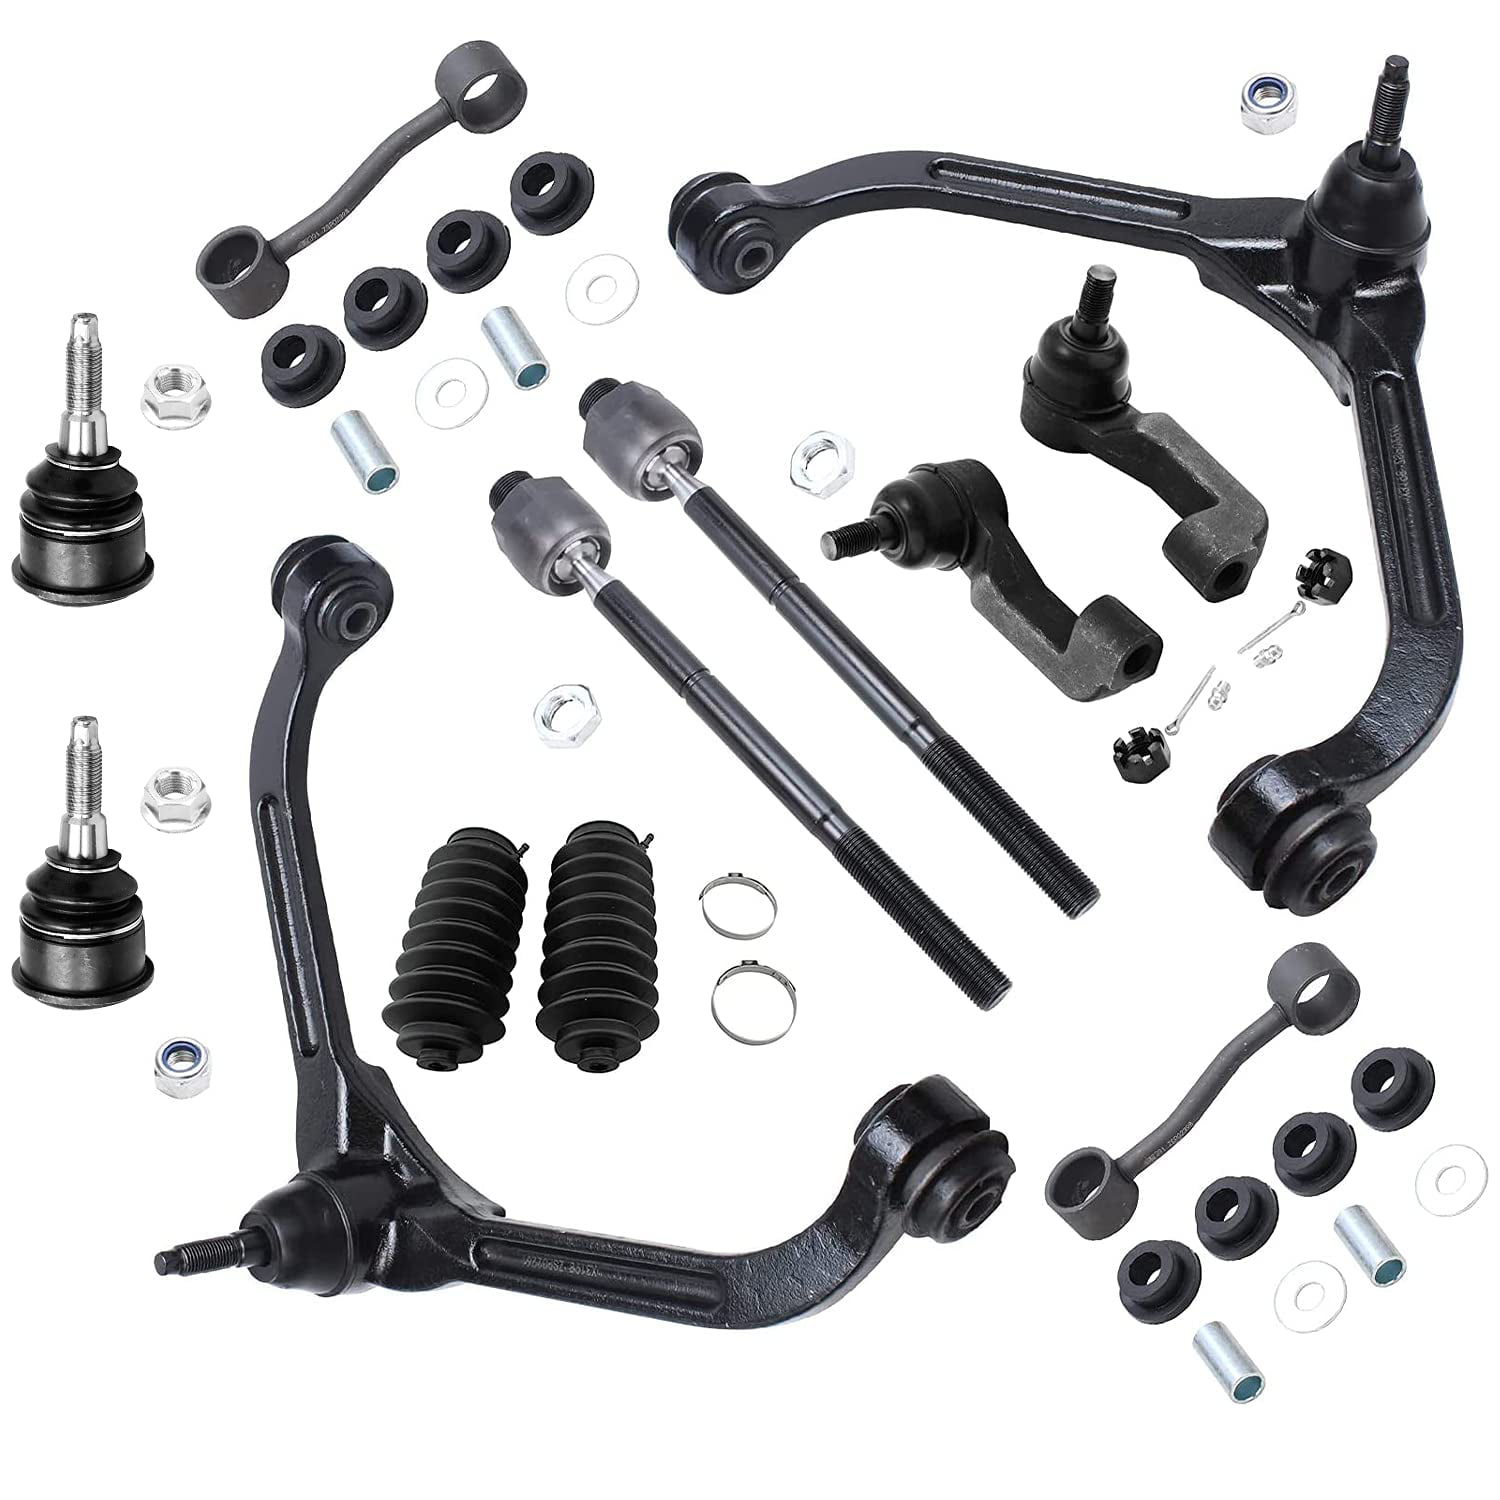 Complete 12-Piece Front Suspension Kit All 4 10-Year Warranty- Both 2 Inner & Outer Tie Rod Ends Front & Rear Sway Bar Links Front Lower Ball Joints All 4 